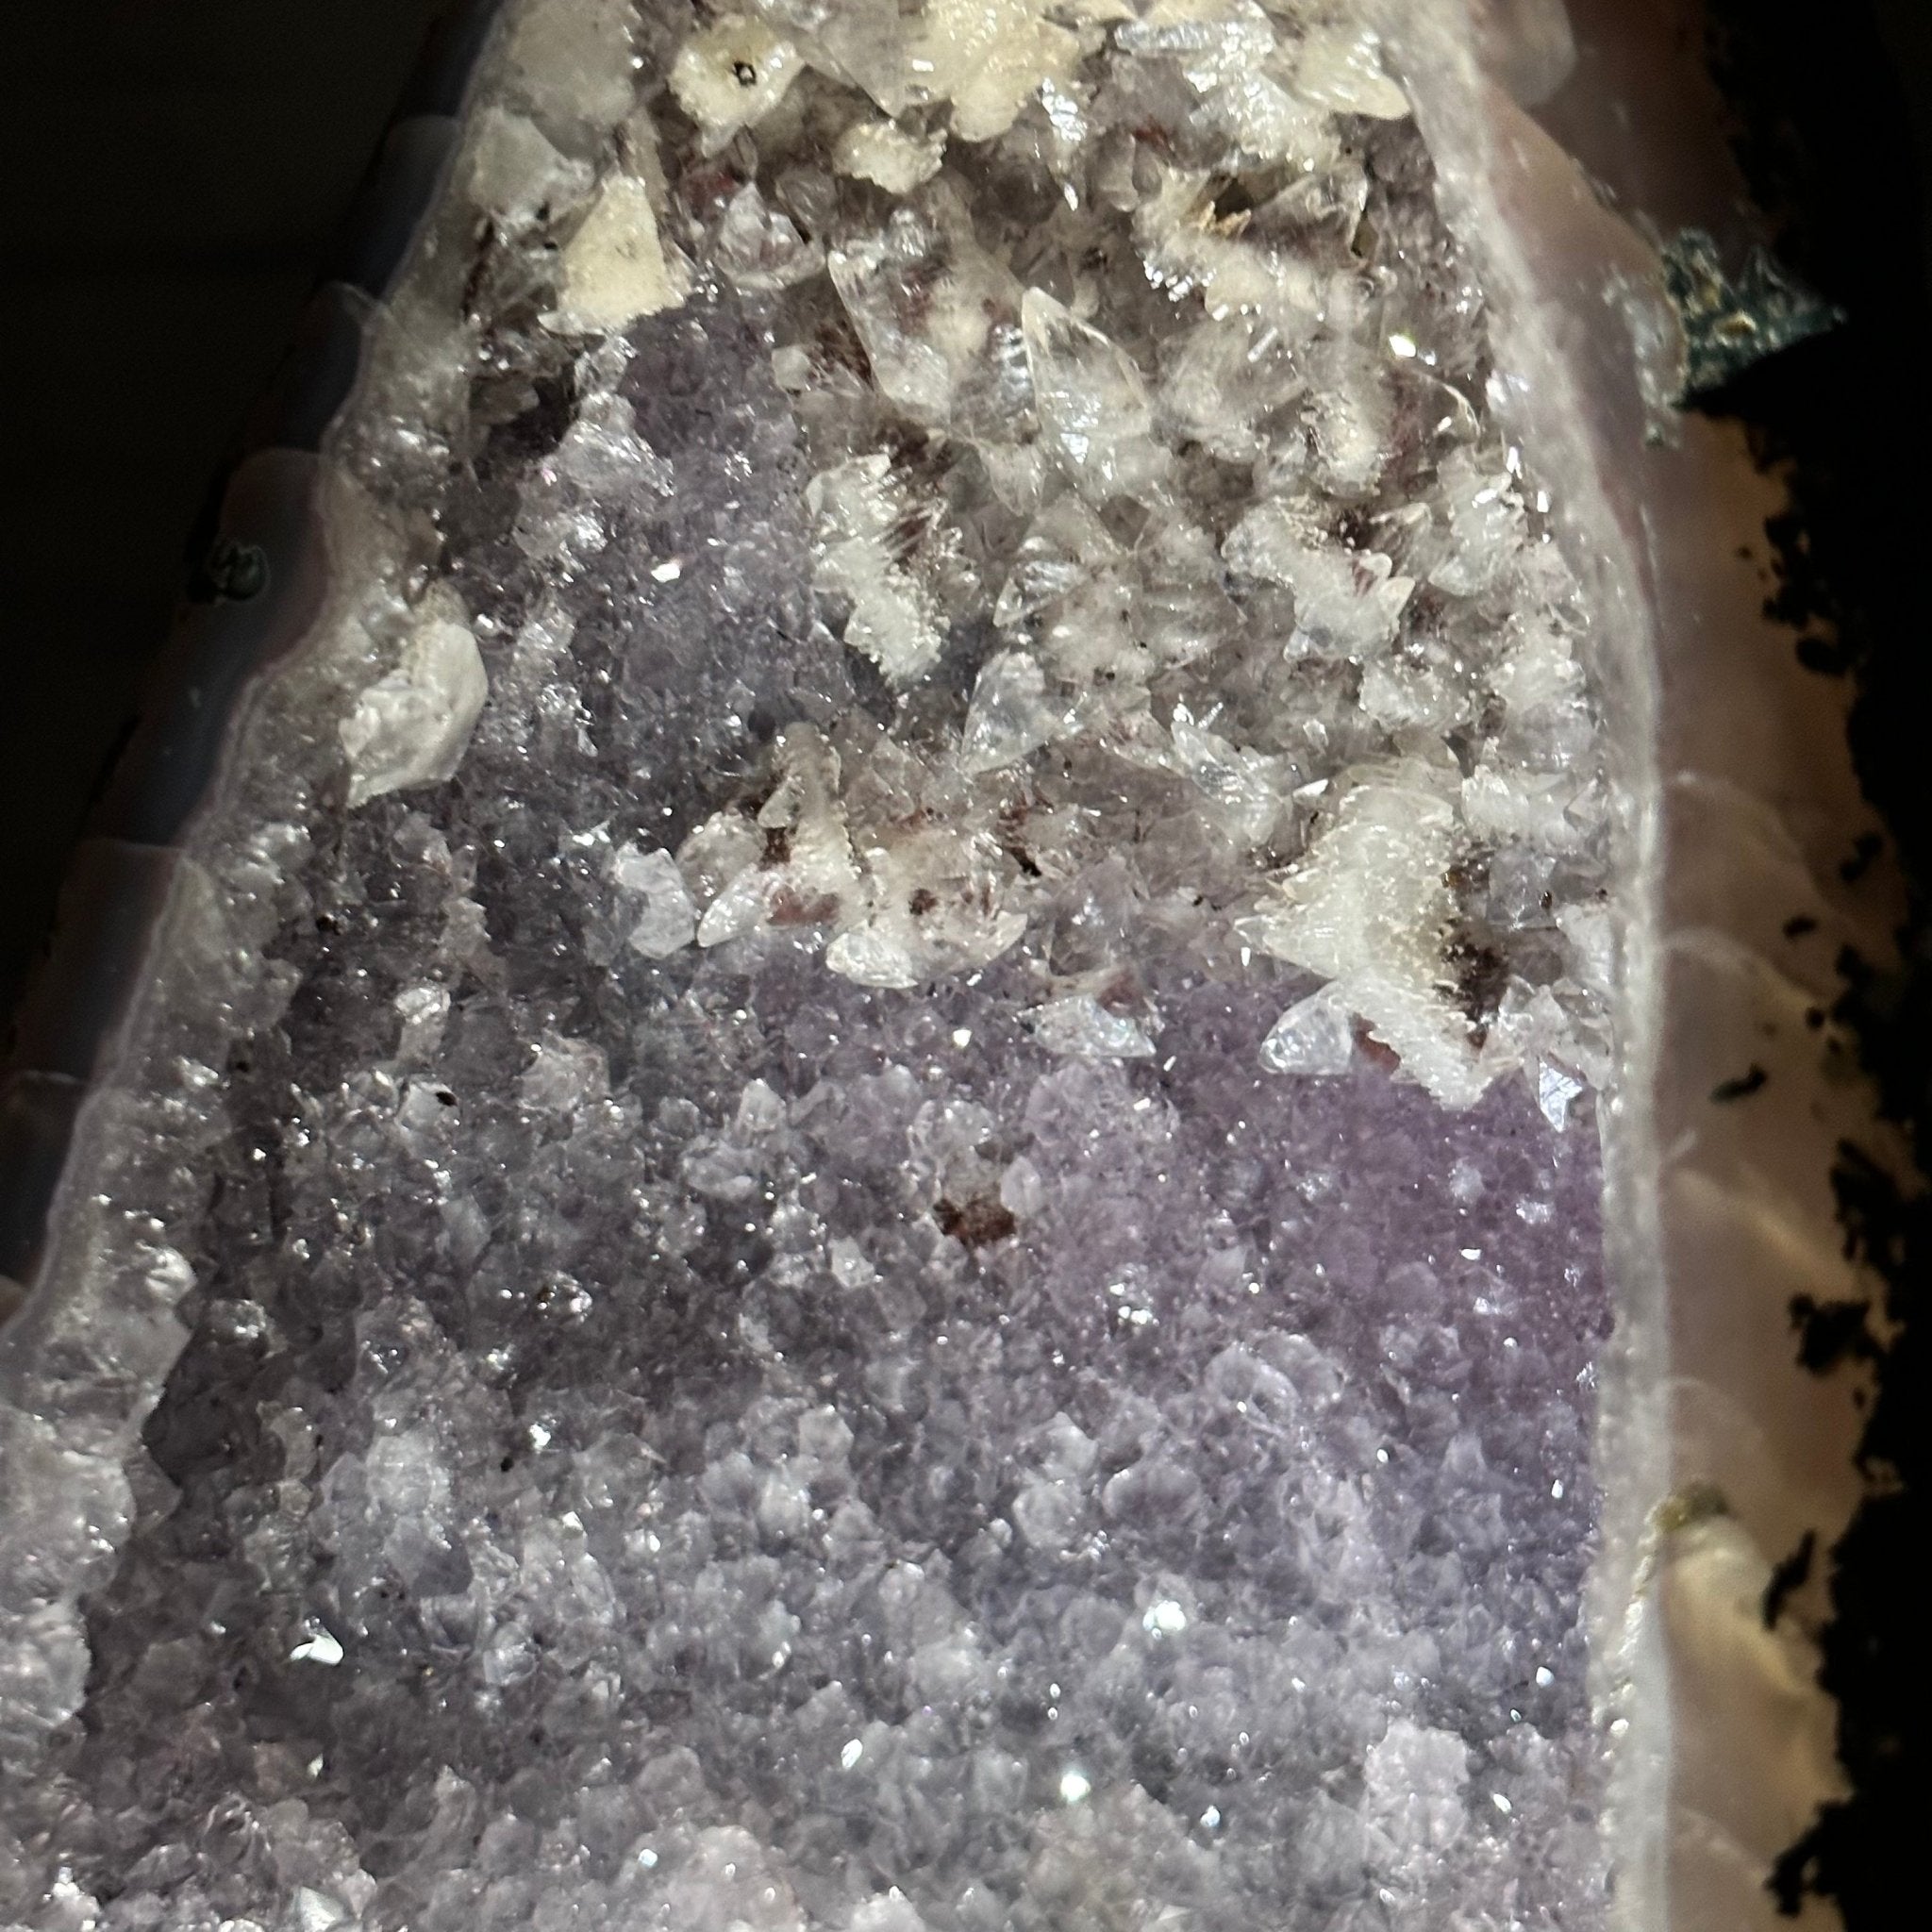 Extra Quality Brazilian Amethyst Cathedral, 33.6 lbs & 18" Tall, Model #5601-1331 by Brazil Gems - Brazil GemsBrazil GemsExtra Quality Brazilian Amethyst Cathedral, 33.6 lbs & 18" Tall, Model #5601-1331 by Brazil GemsCathedrals5601-1331